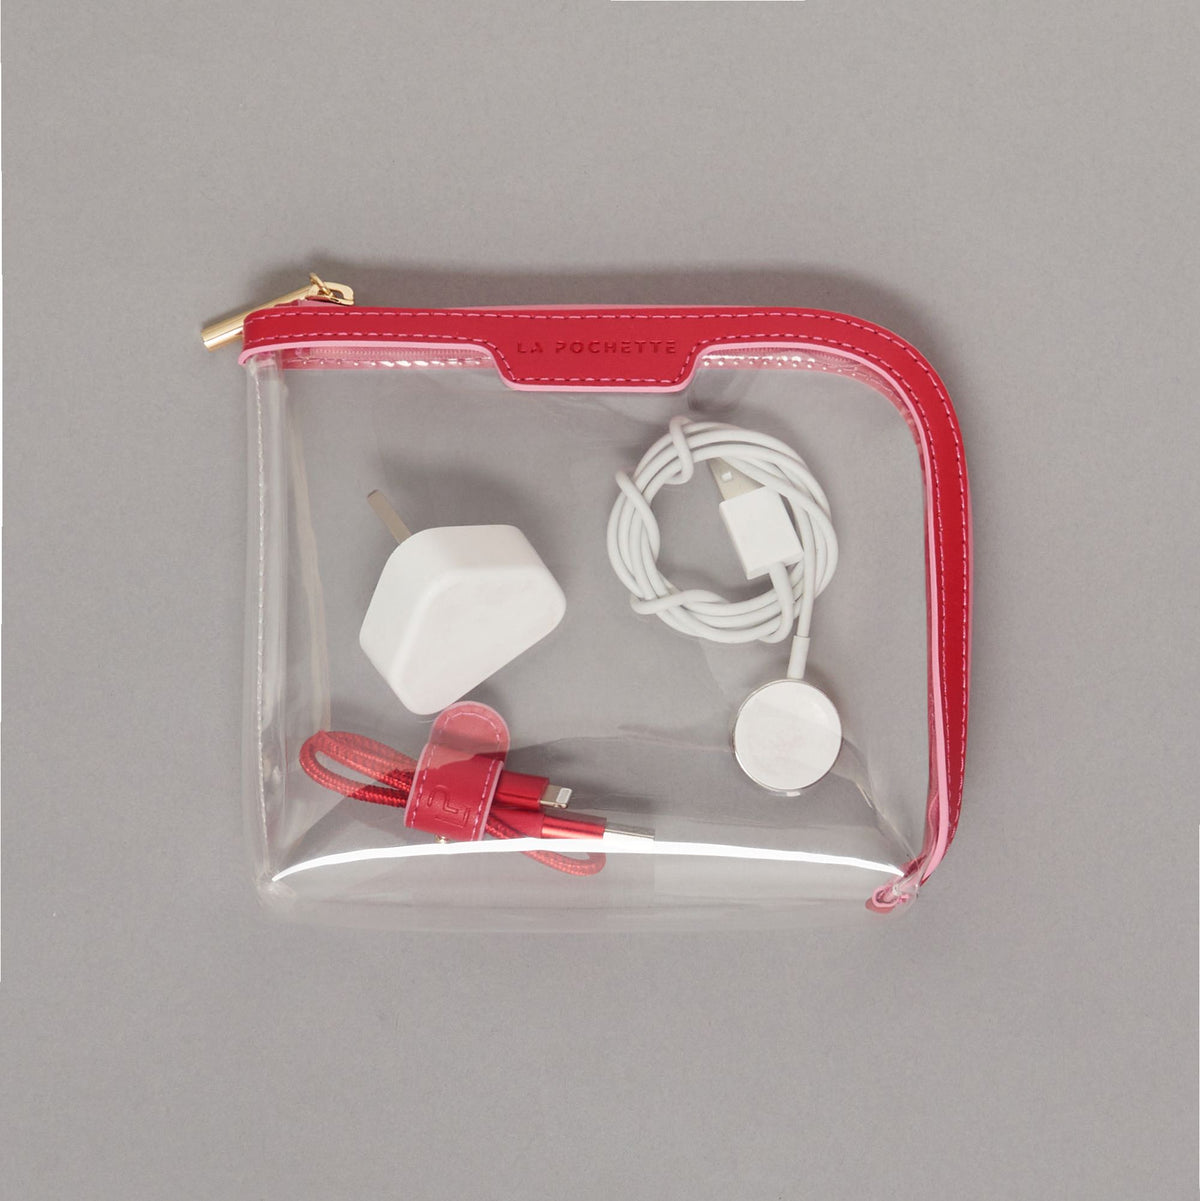 Small Anywhere Everywhere Pouch in Chilli Peony colurway containing Cable Tidy in Chilli Peony colurway and plug 